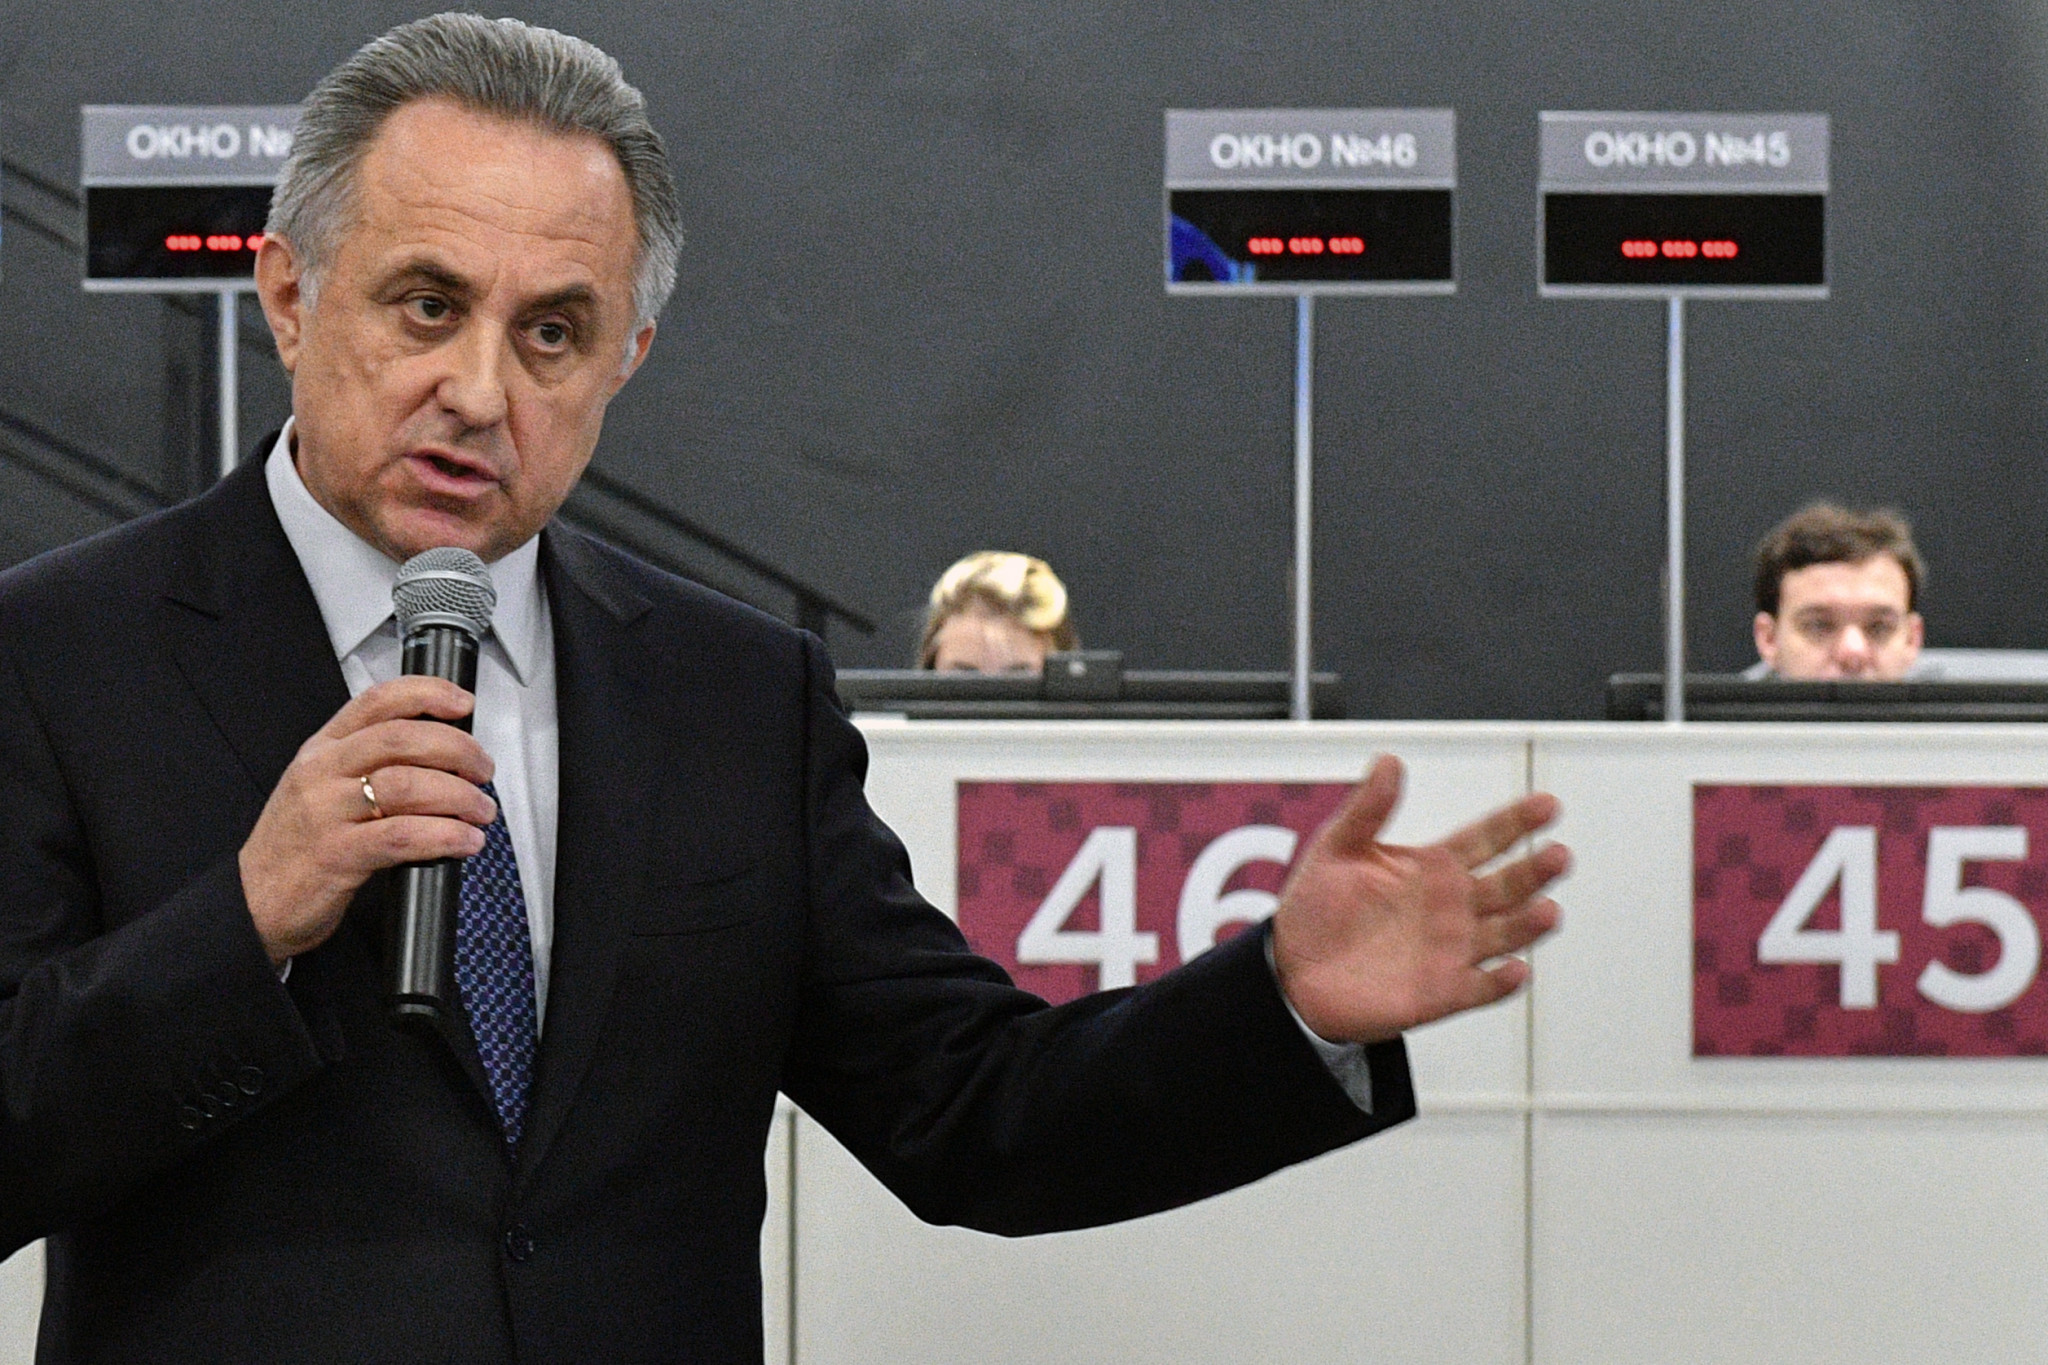 Vitaly Mutko has been banned from the Olympics but remains in charge of the FIFA World Cup 2018 ©Getty Images